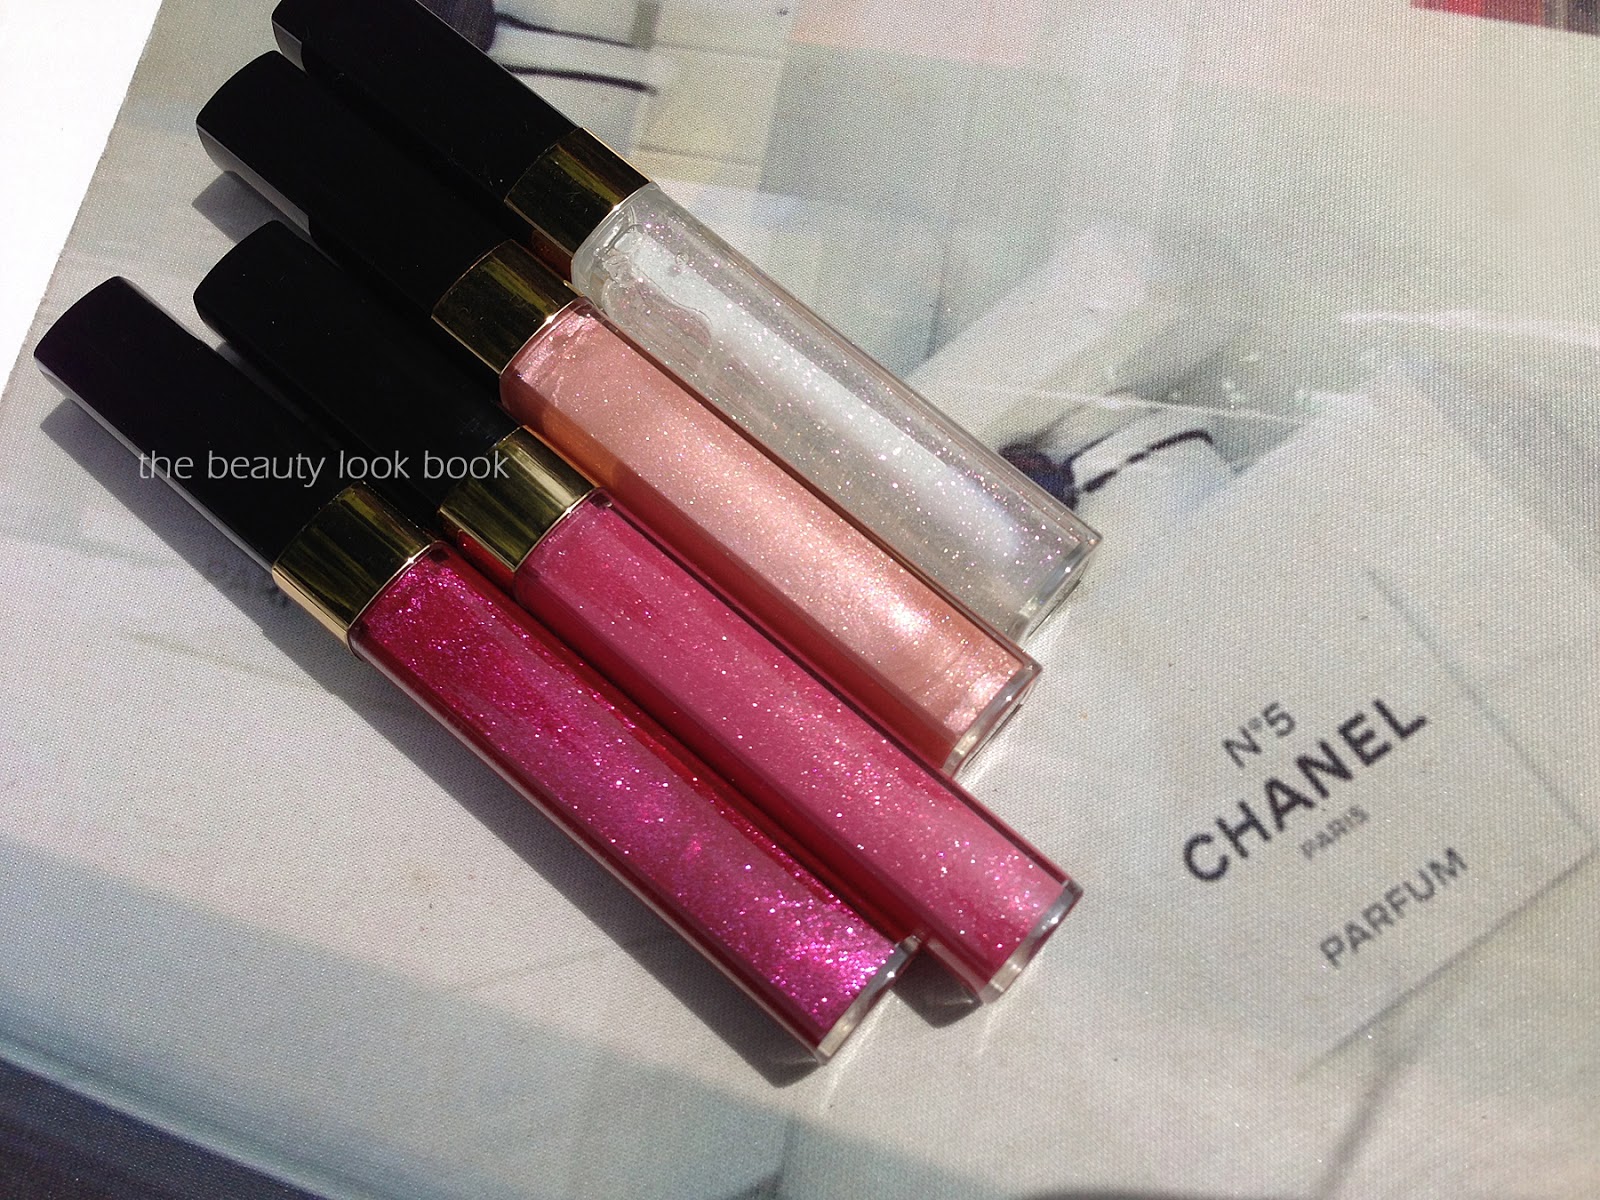 Chanel Ocean Shimmer, Seashell, Rose Sauvage and Daydream